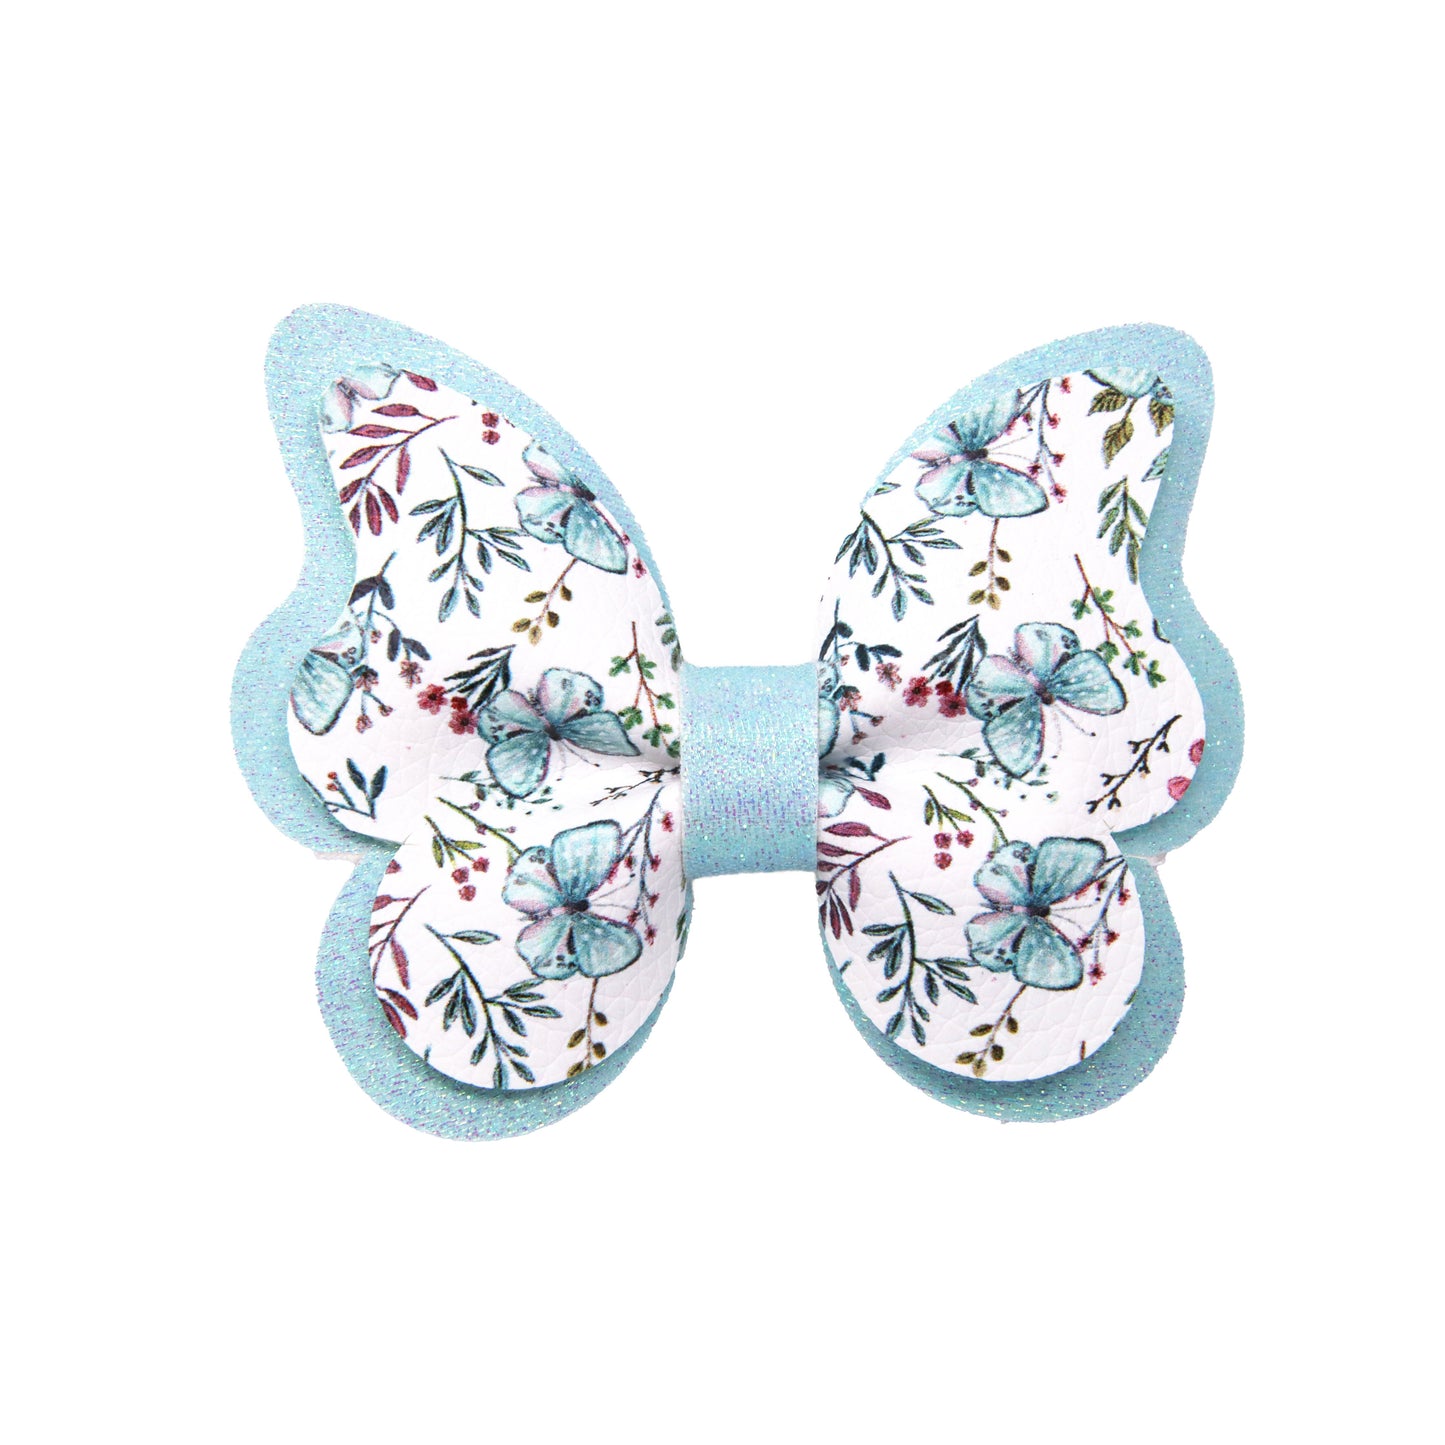 3.5 inch Blue Butterflies Vidia Pinch Bow. Simple and elegant.